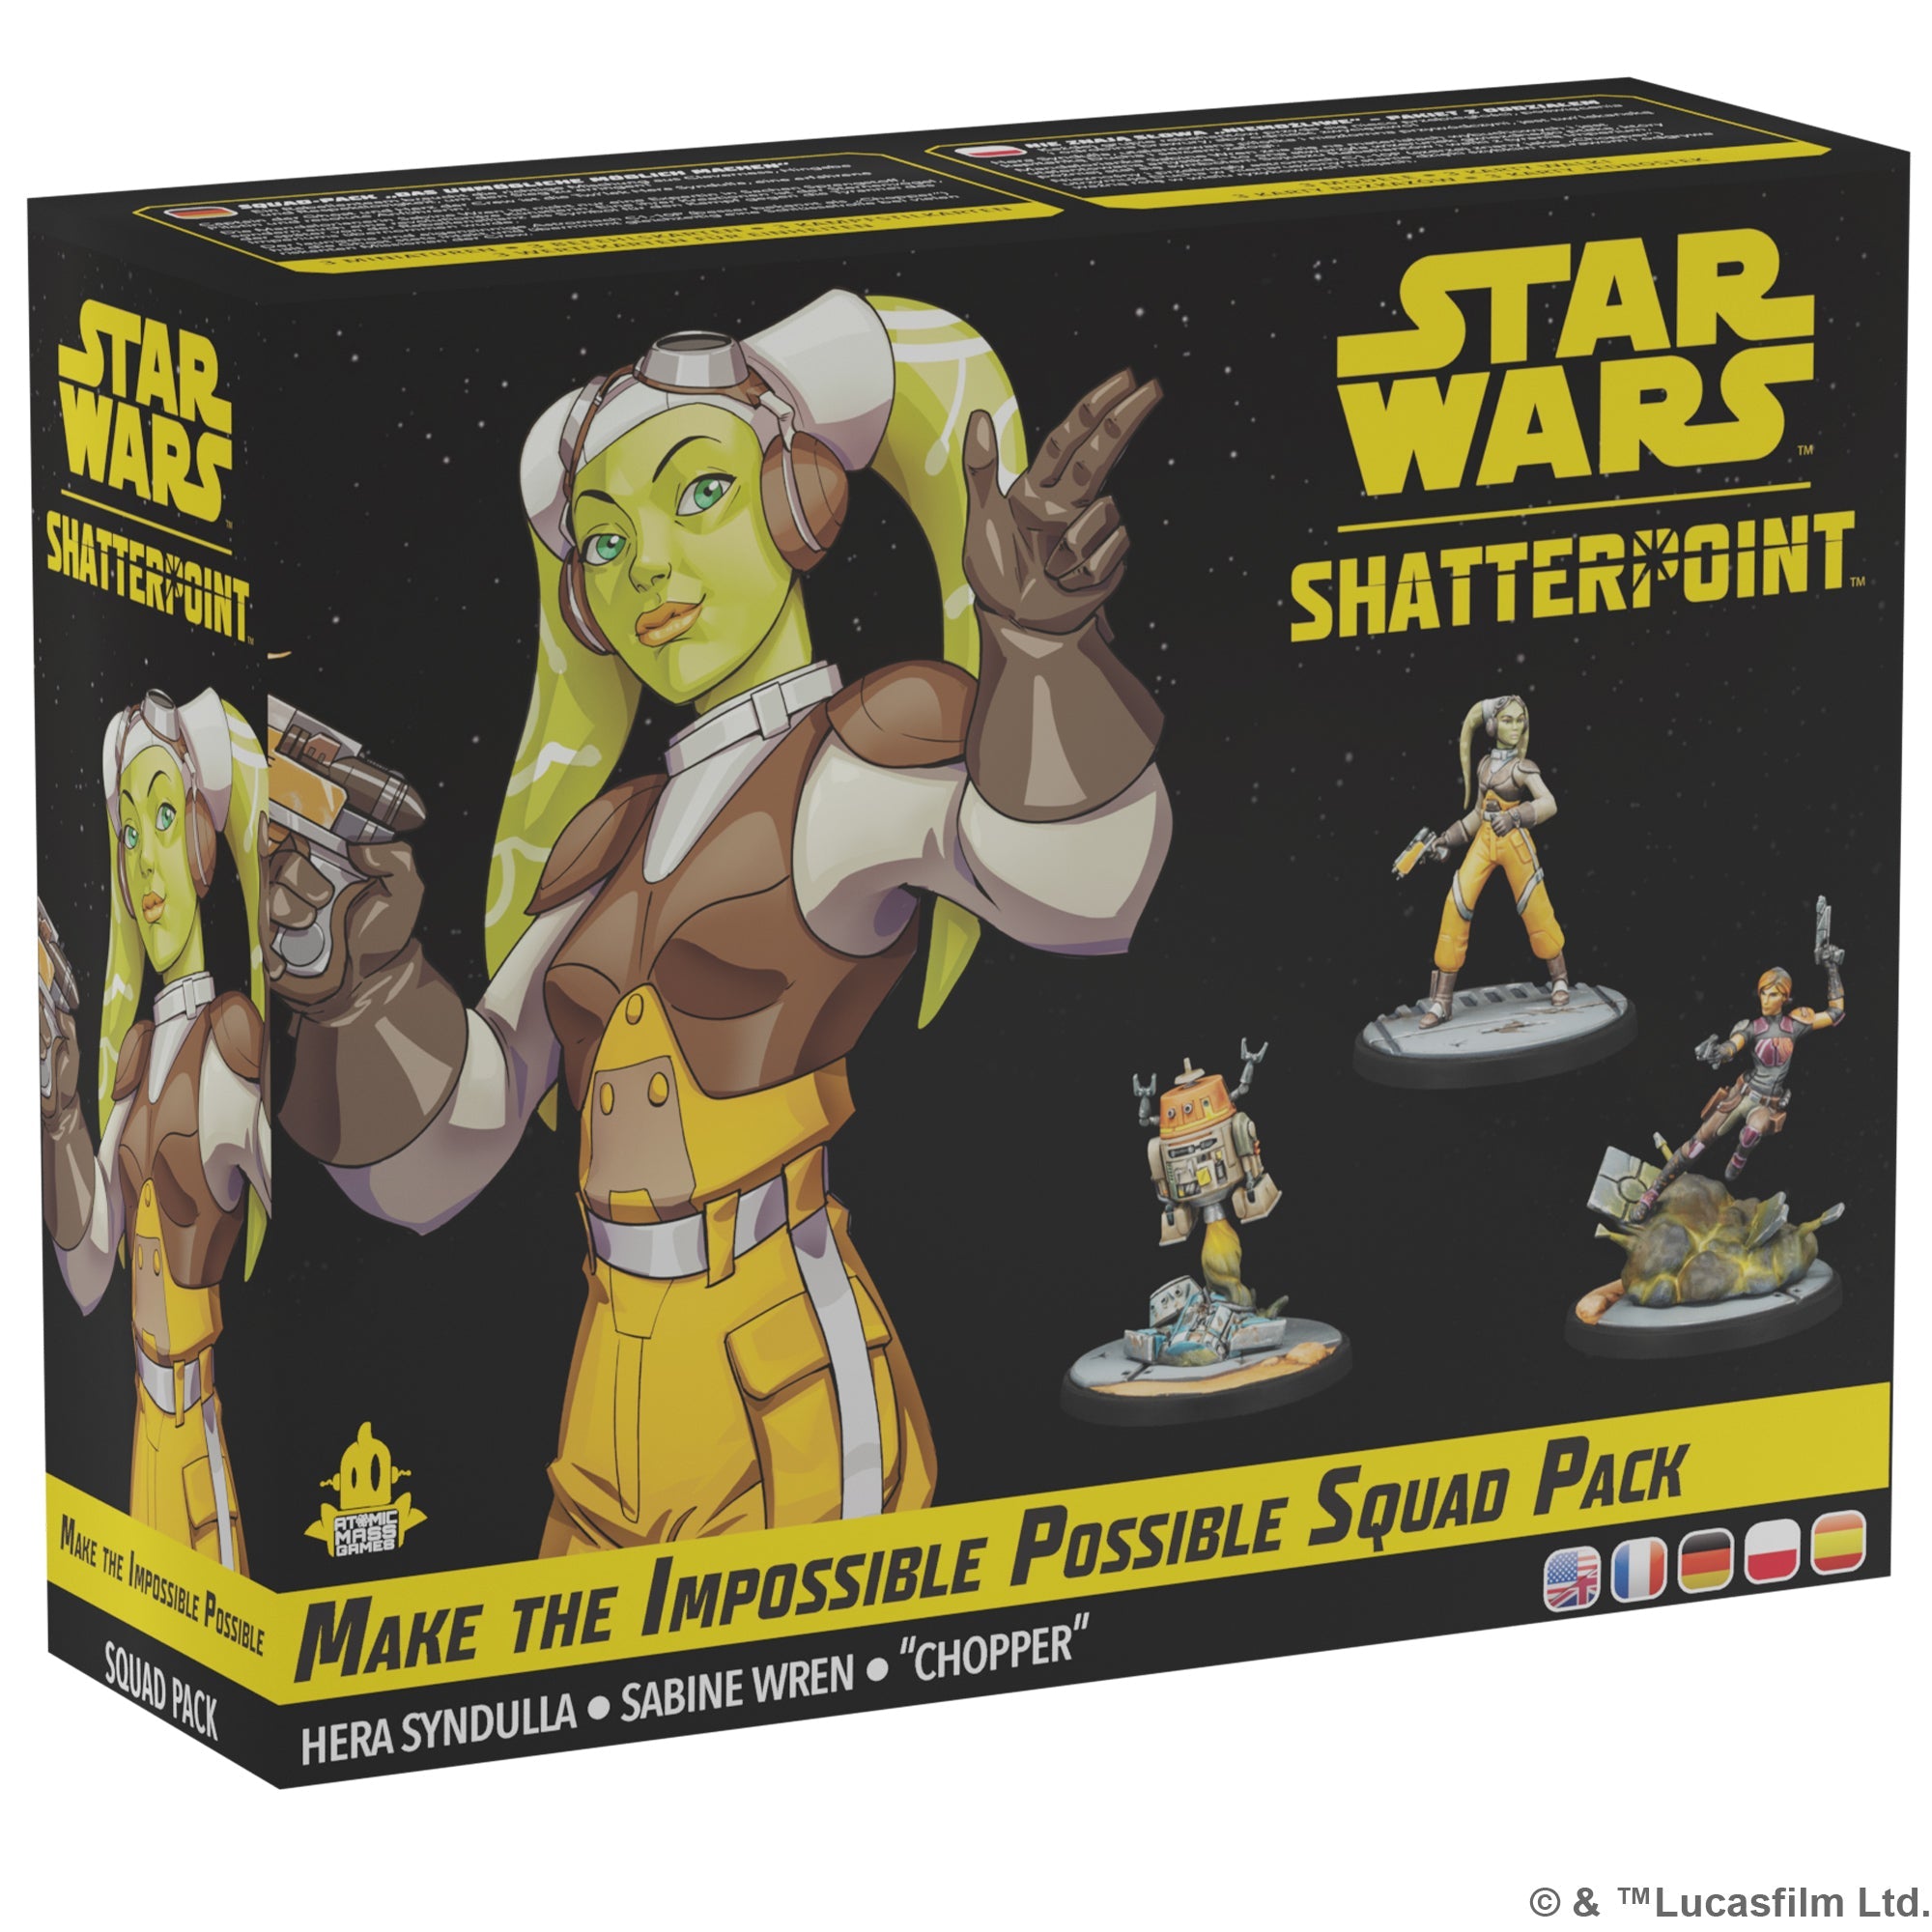 Star Wars Shatterpoint: Make the Impossible Possible, Hera Syndulla Squad Pack [July 5]